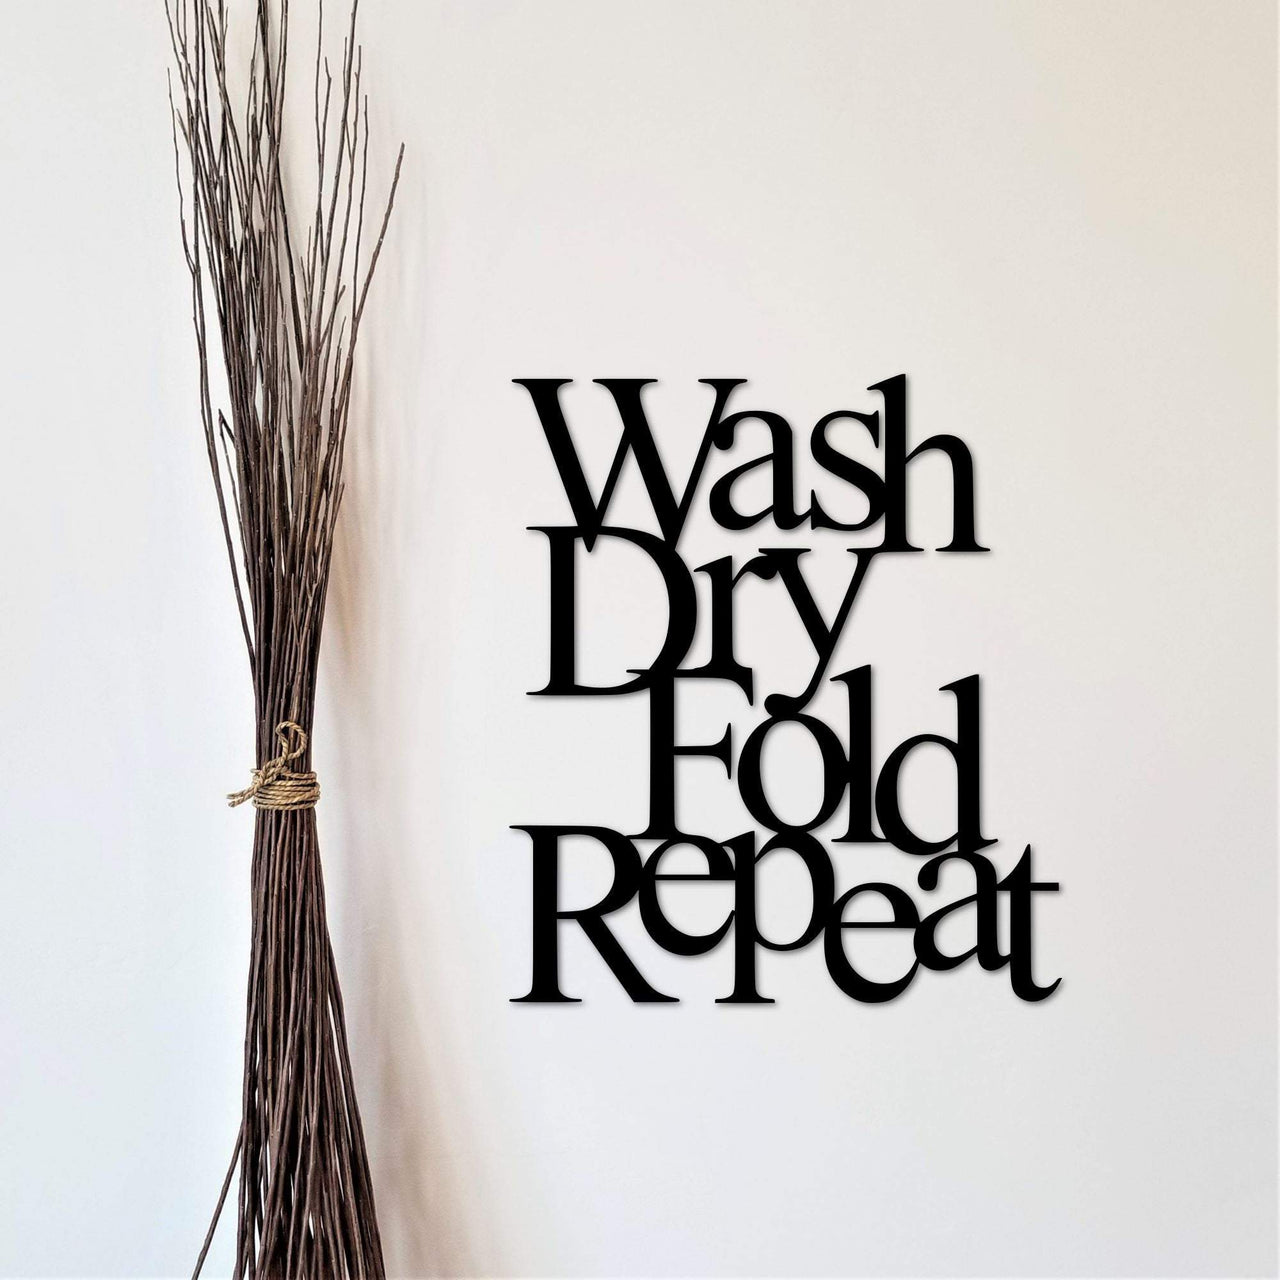 Wash Dry Fold Repeat Sign | Laundry Room Sign | Metal Wall Art | Laundry Room Decor | Cutout with Saying | Word Art | Metal Words